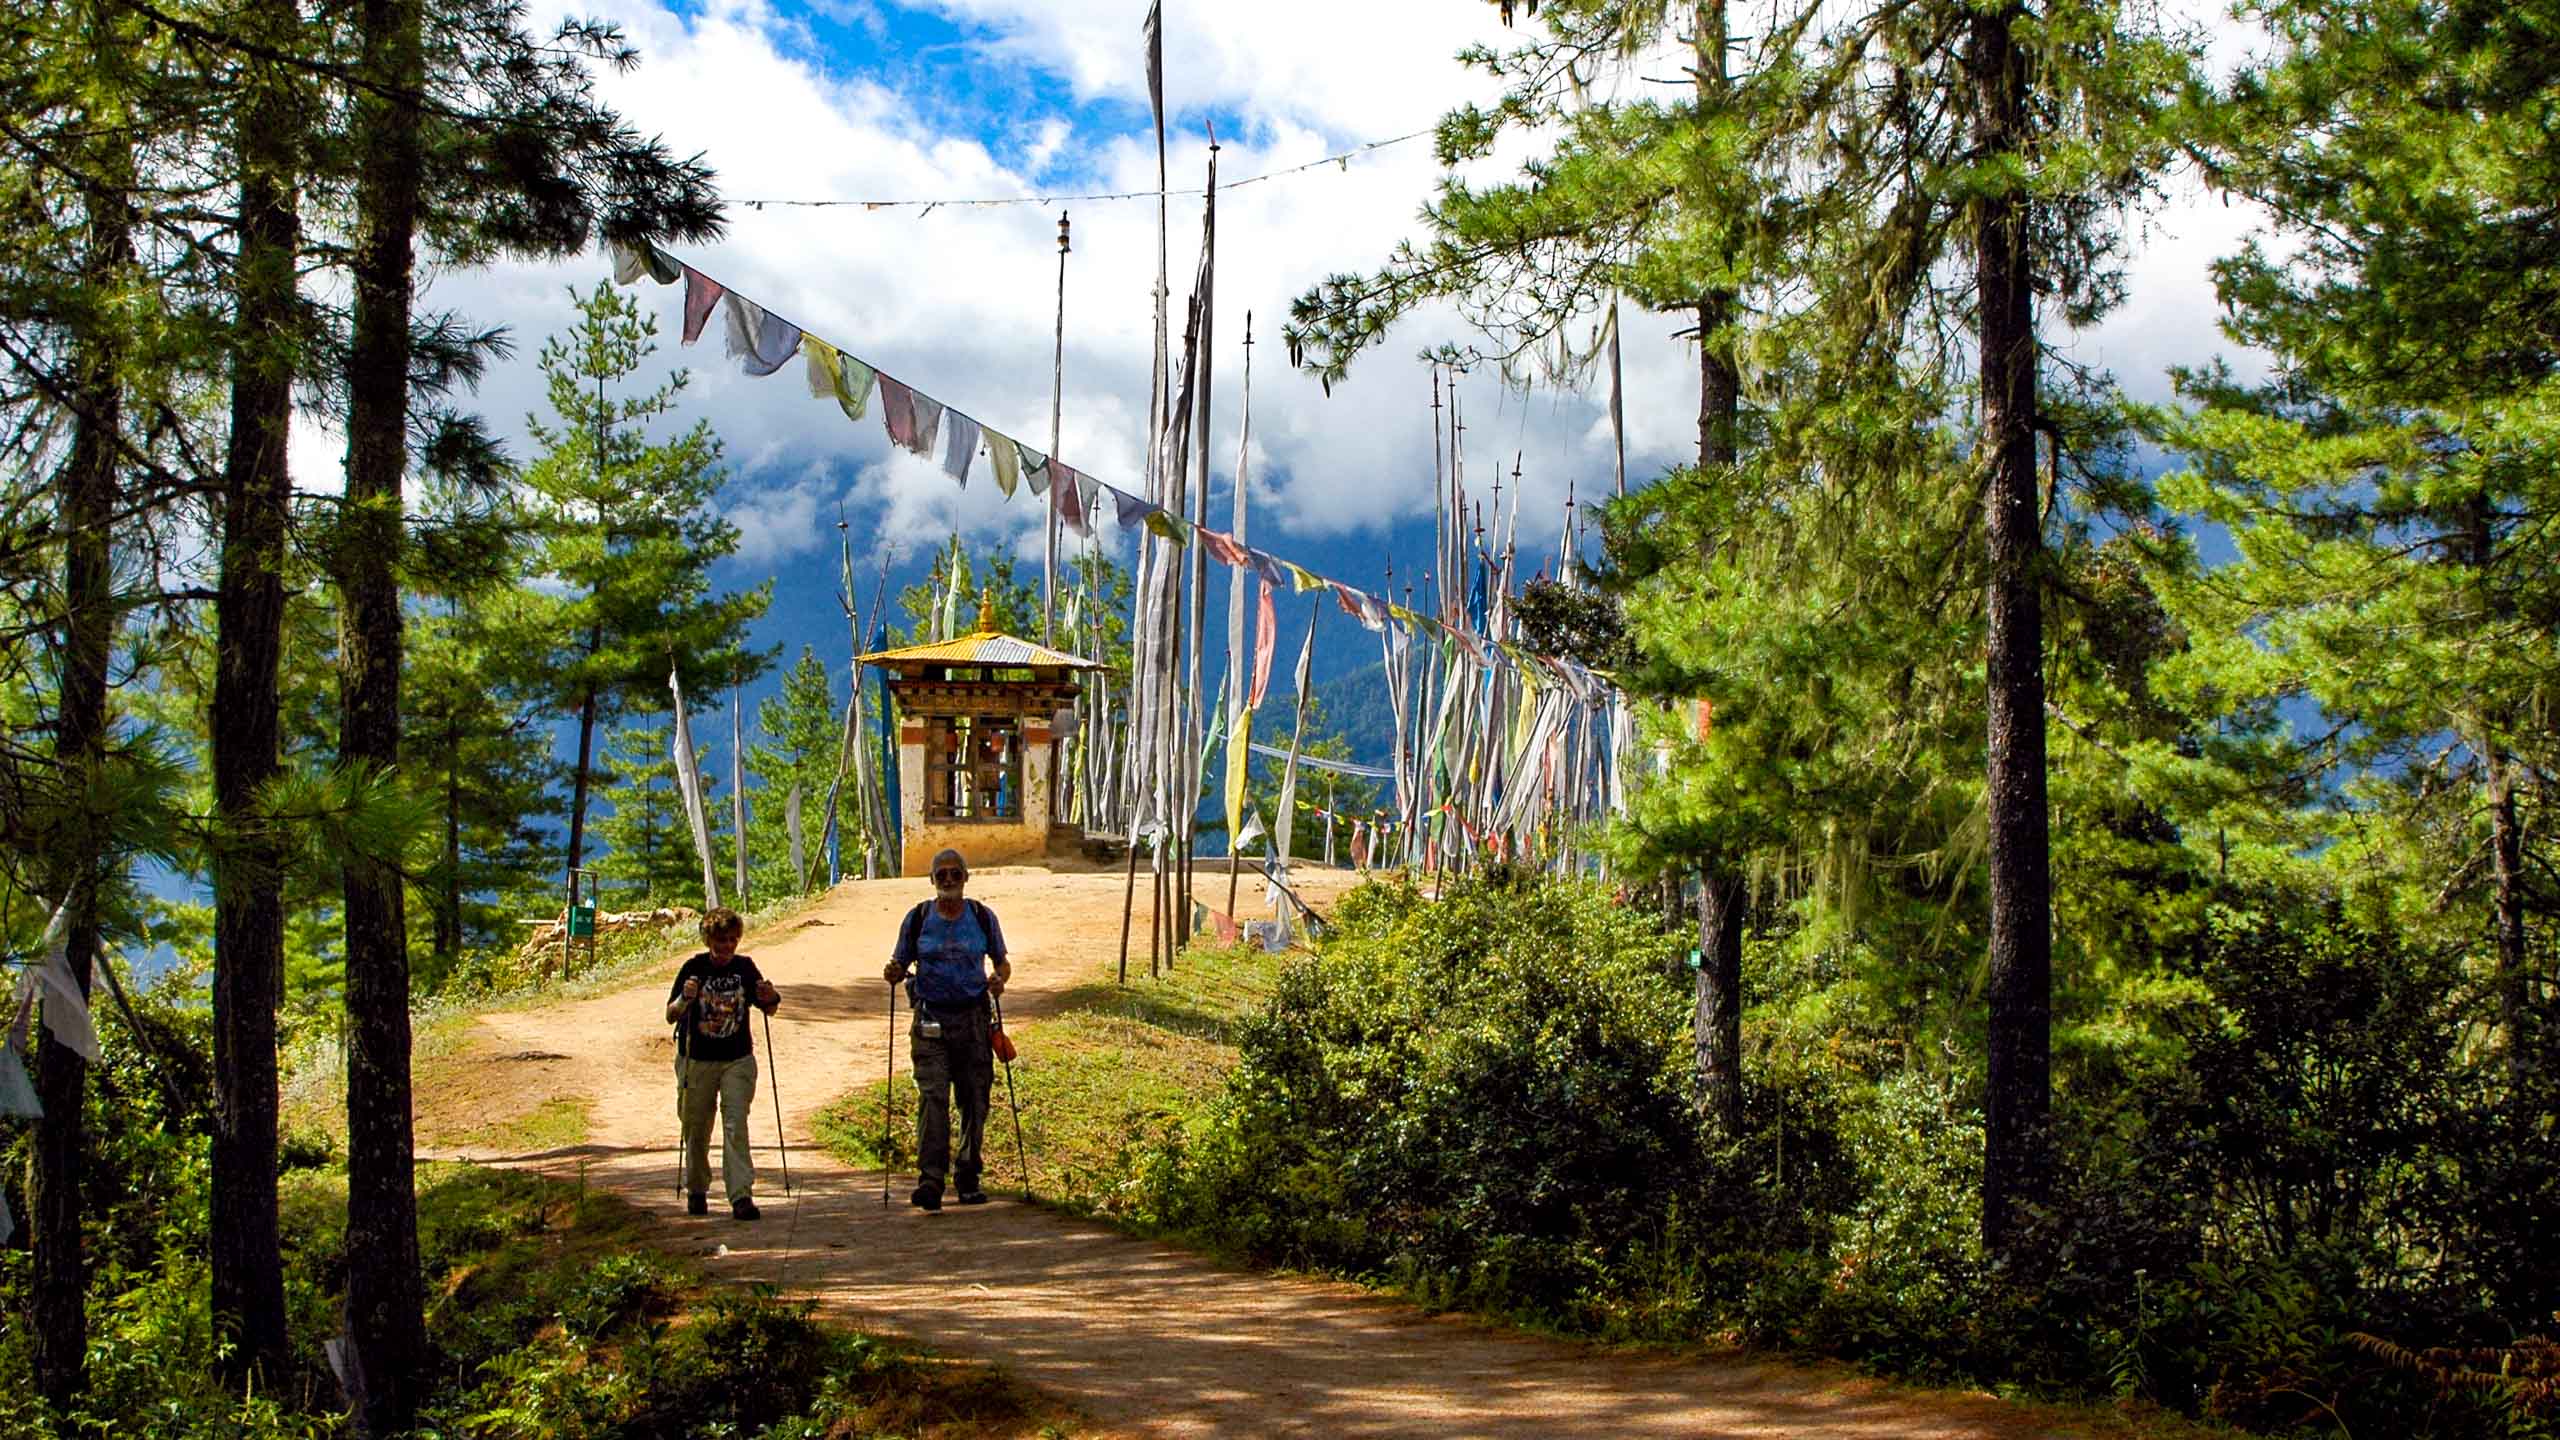 Hikers in Bhutan forest walk beneath colorful flags